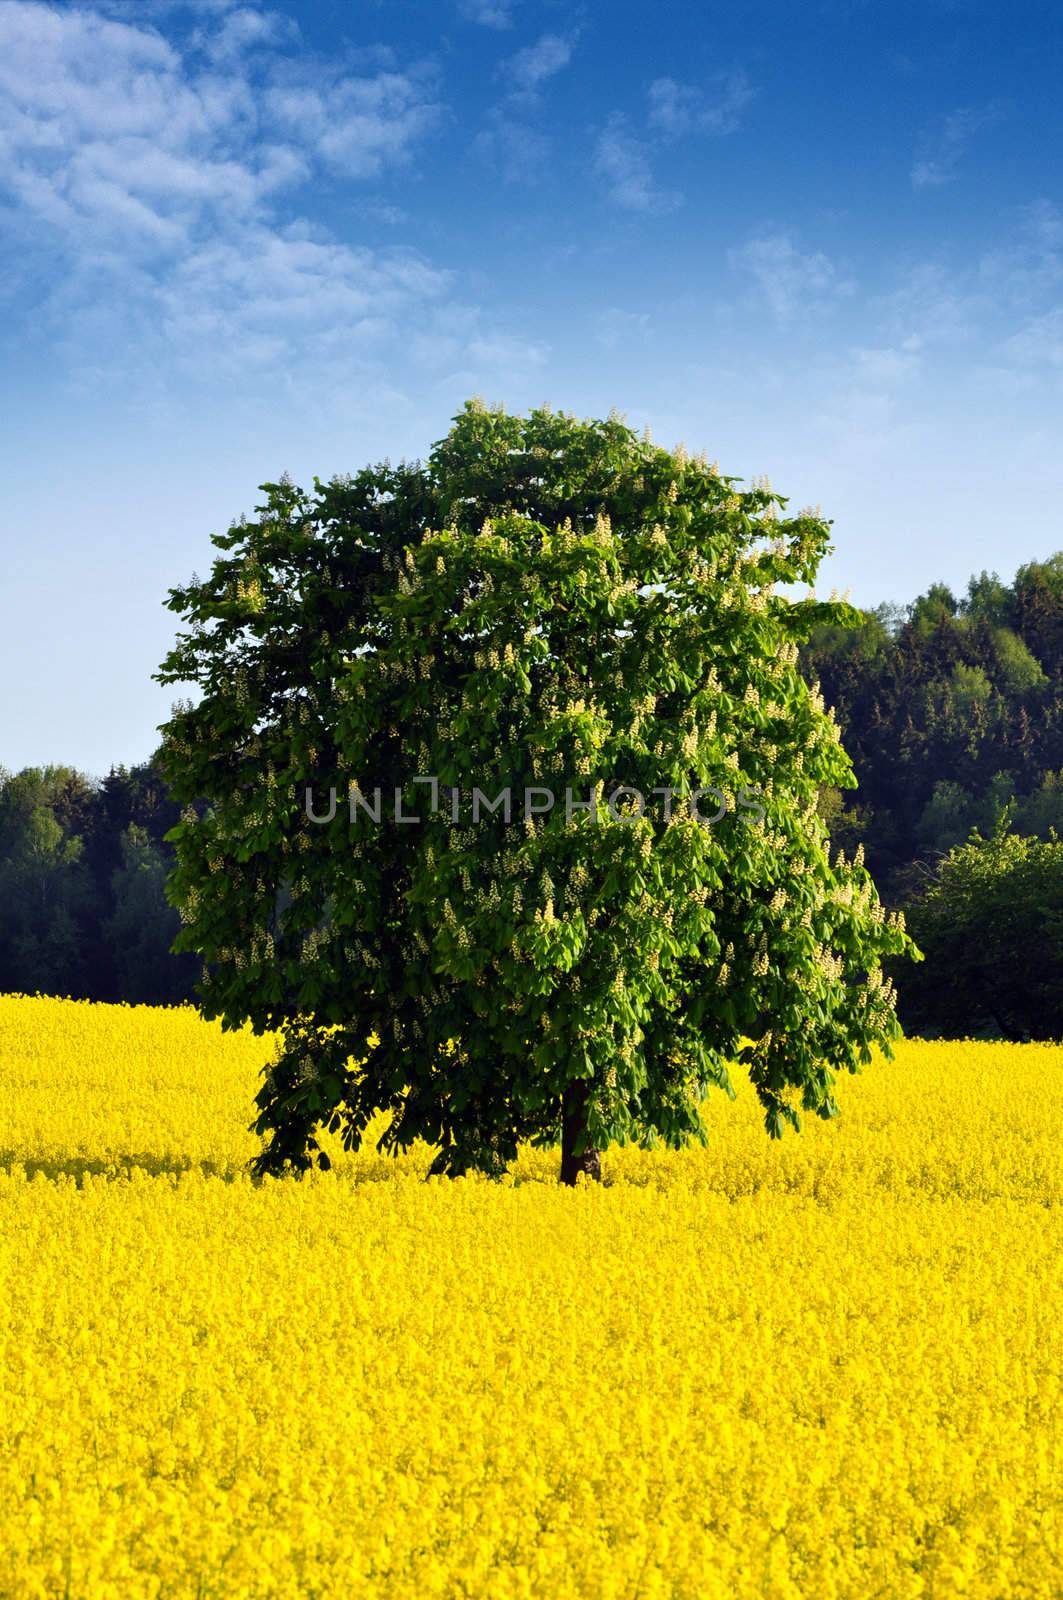 Chestnut tree in the middle of a  Rapeseed Field.